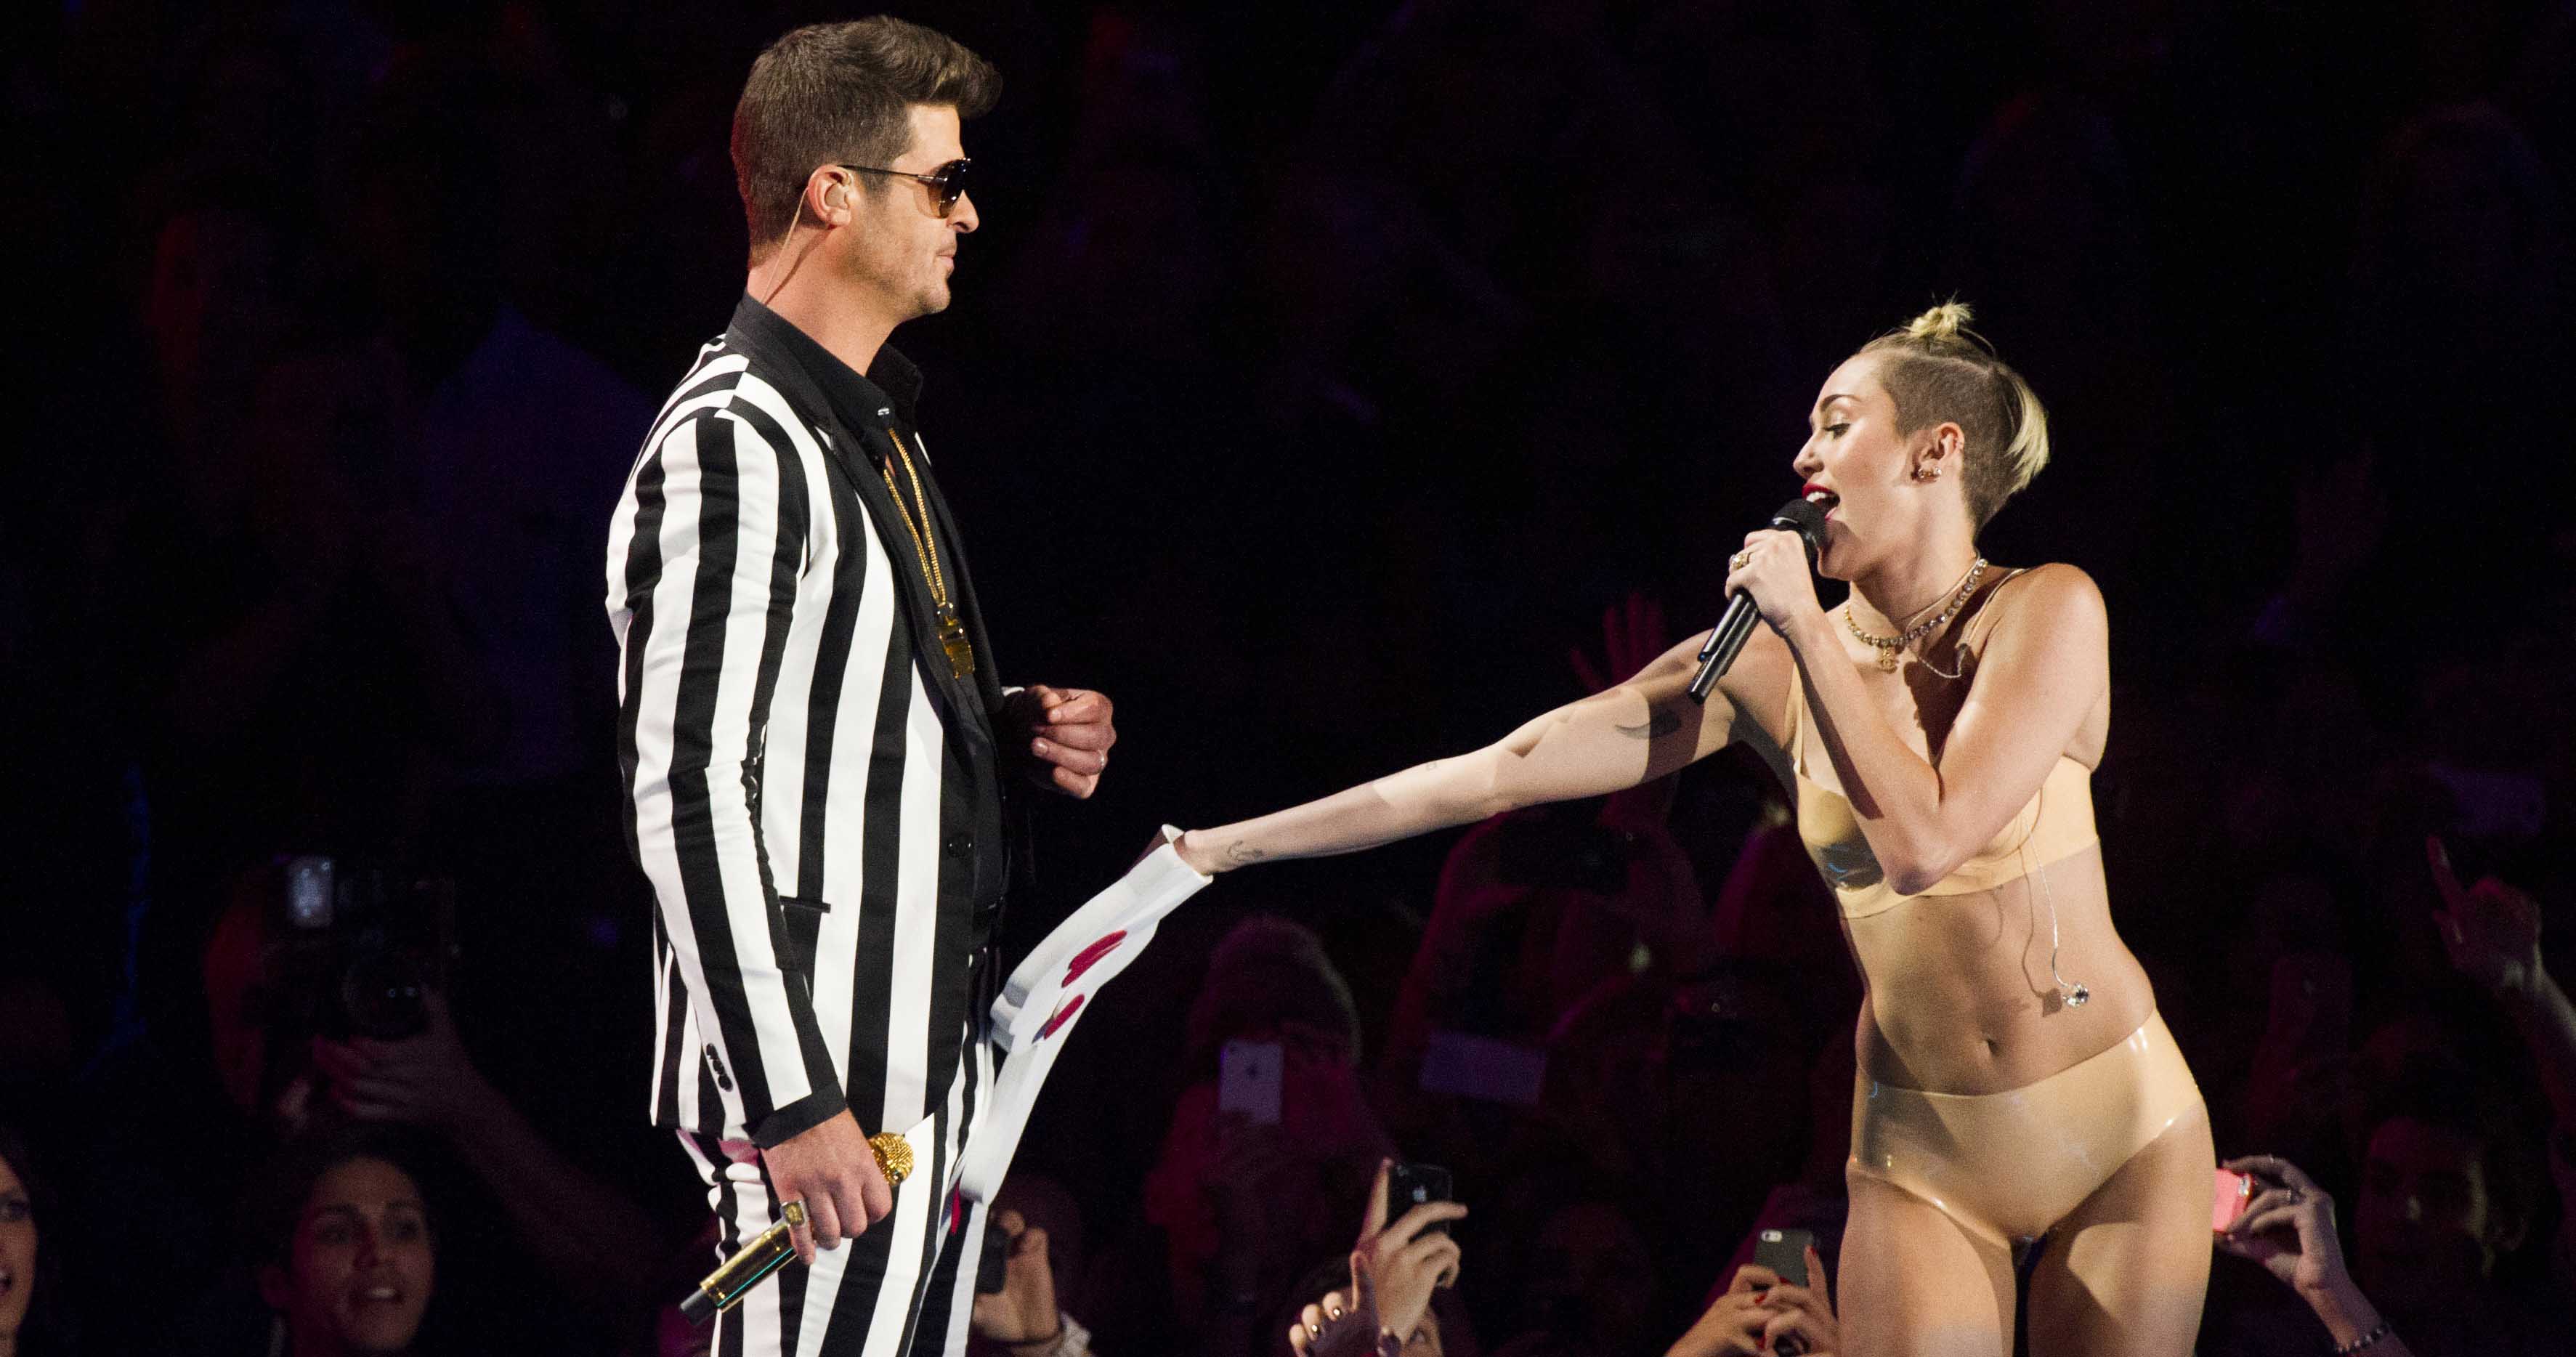 Miley Cyrus Bad Photo Sex - The Year in Sex (or Pop Goes the Weasel) | The Nation